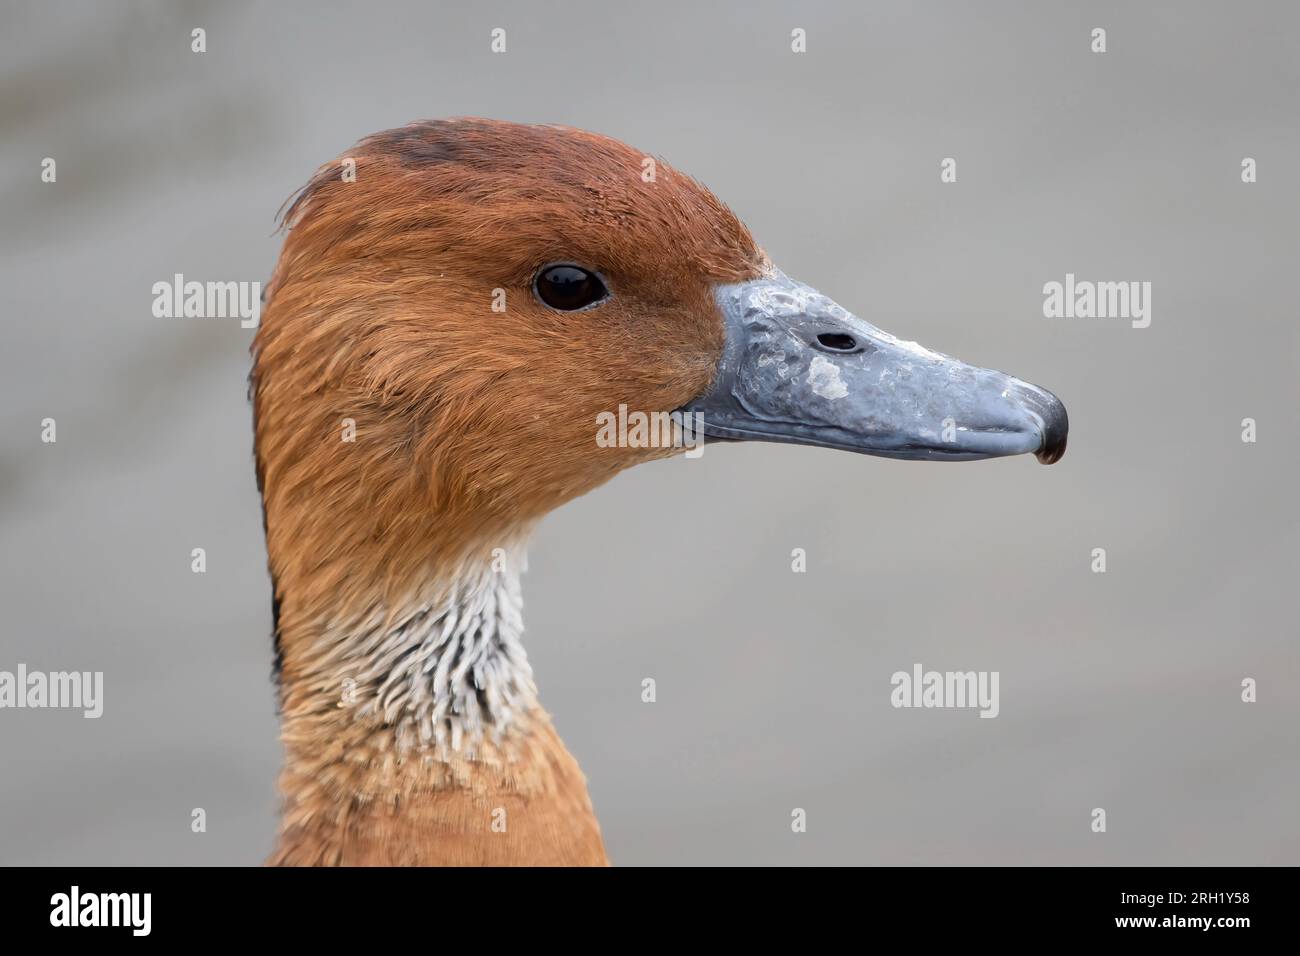 A close up profile portrait of fulvous whistling duck which just shows the head and neck or the bird Stock Photo